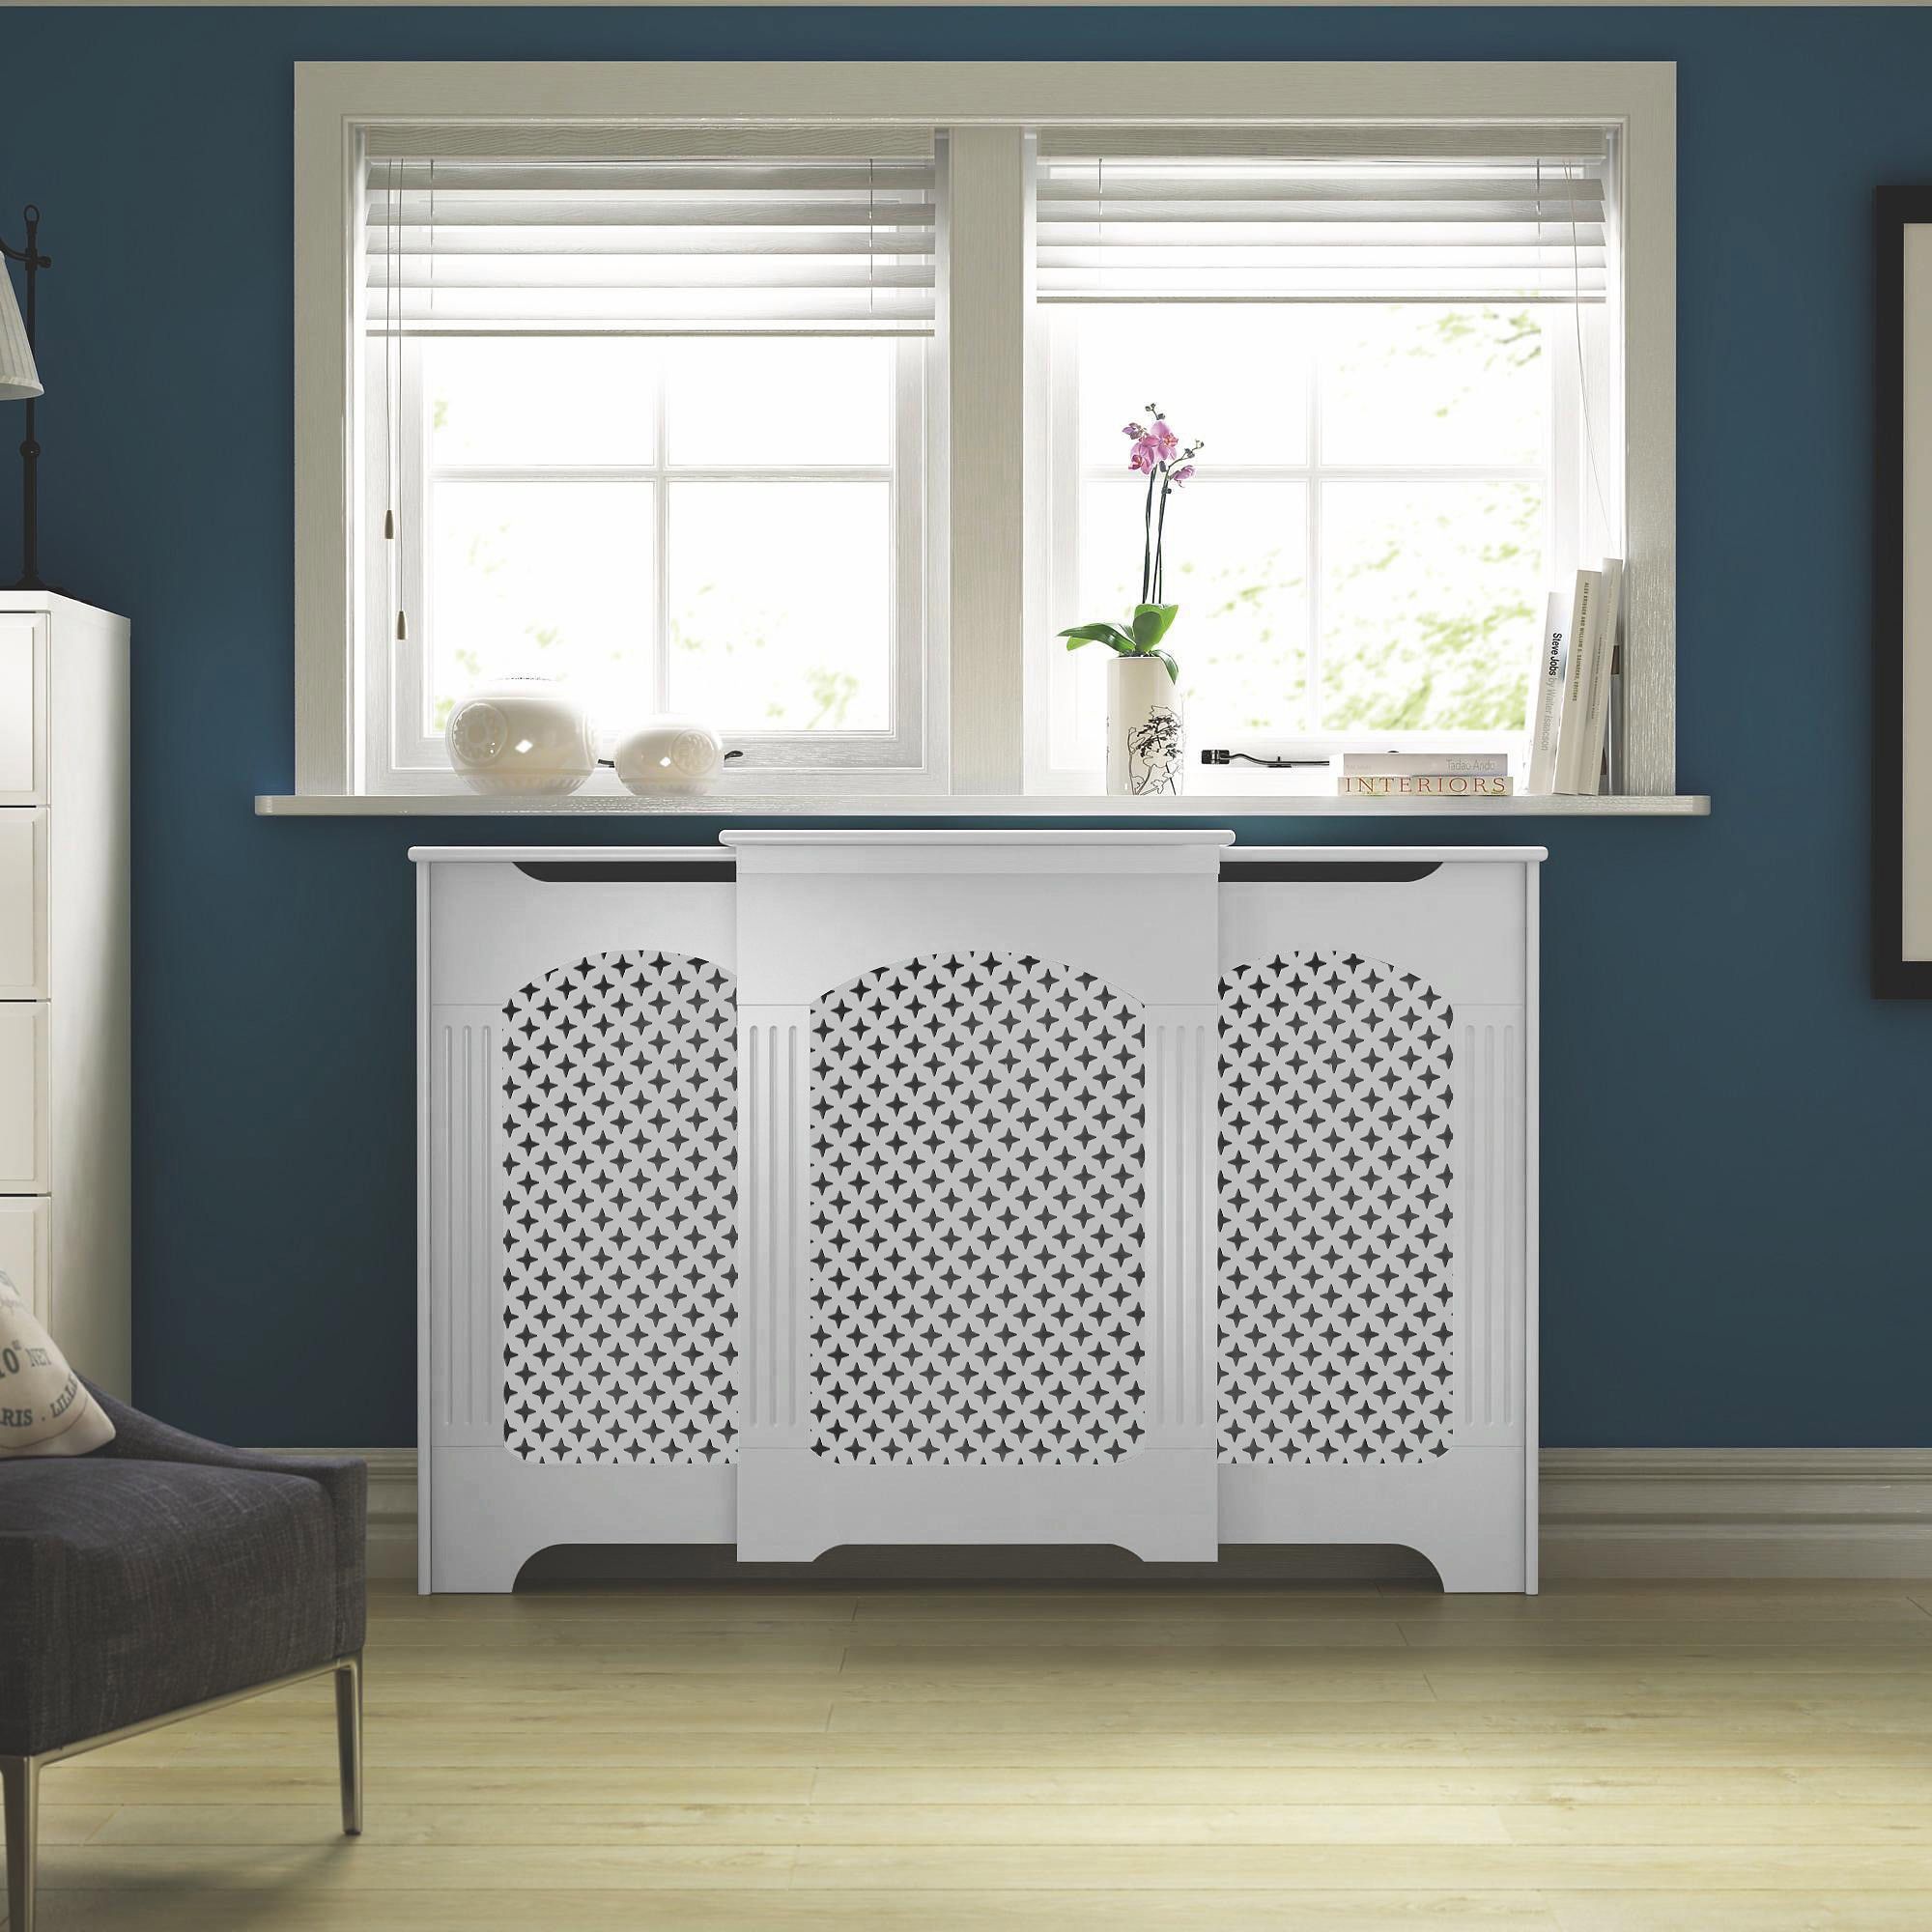 Cambridge Small - medium White Traditional Radiator cover 936mm(H) 1420mm(W) 220mm(D)